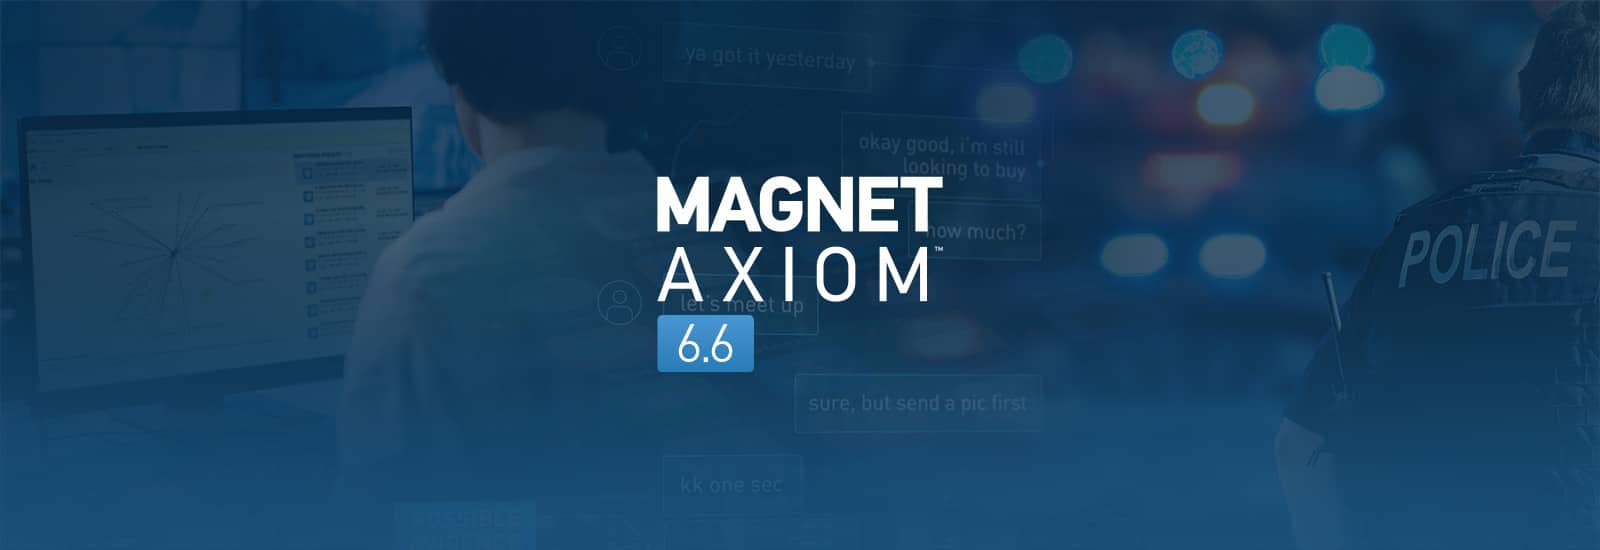 A decorative header for the Magnet AXIOM 6.6 release